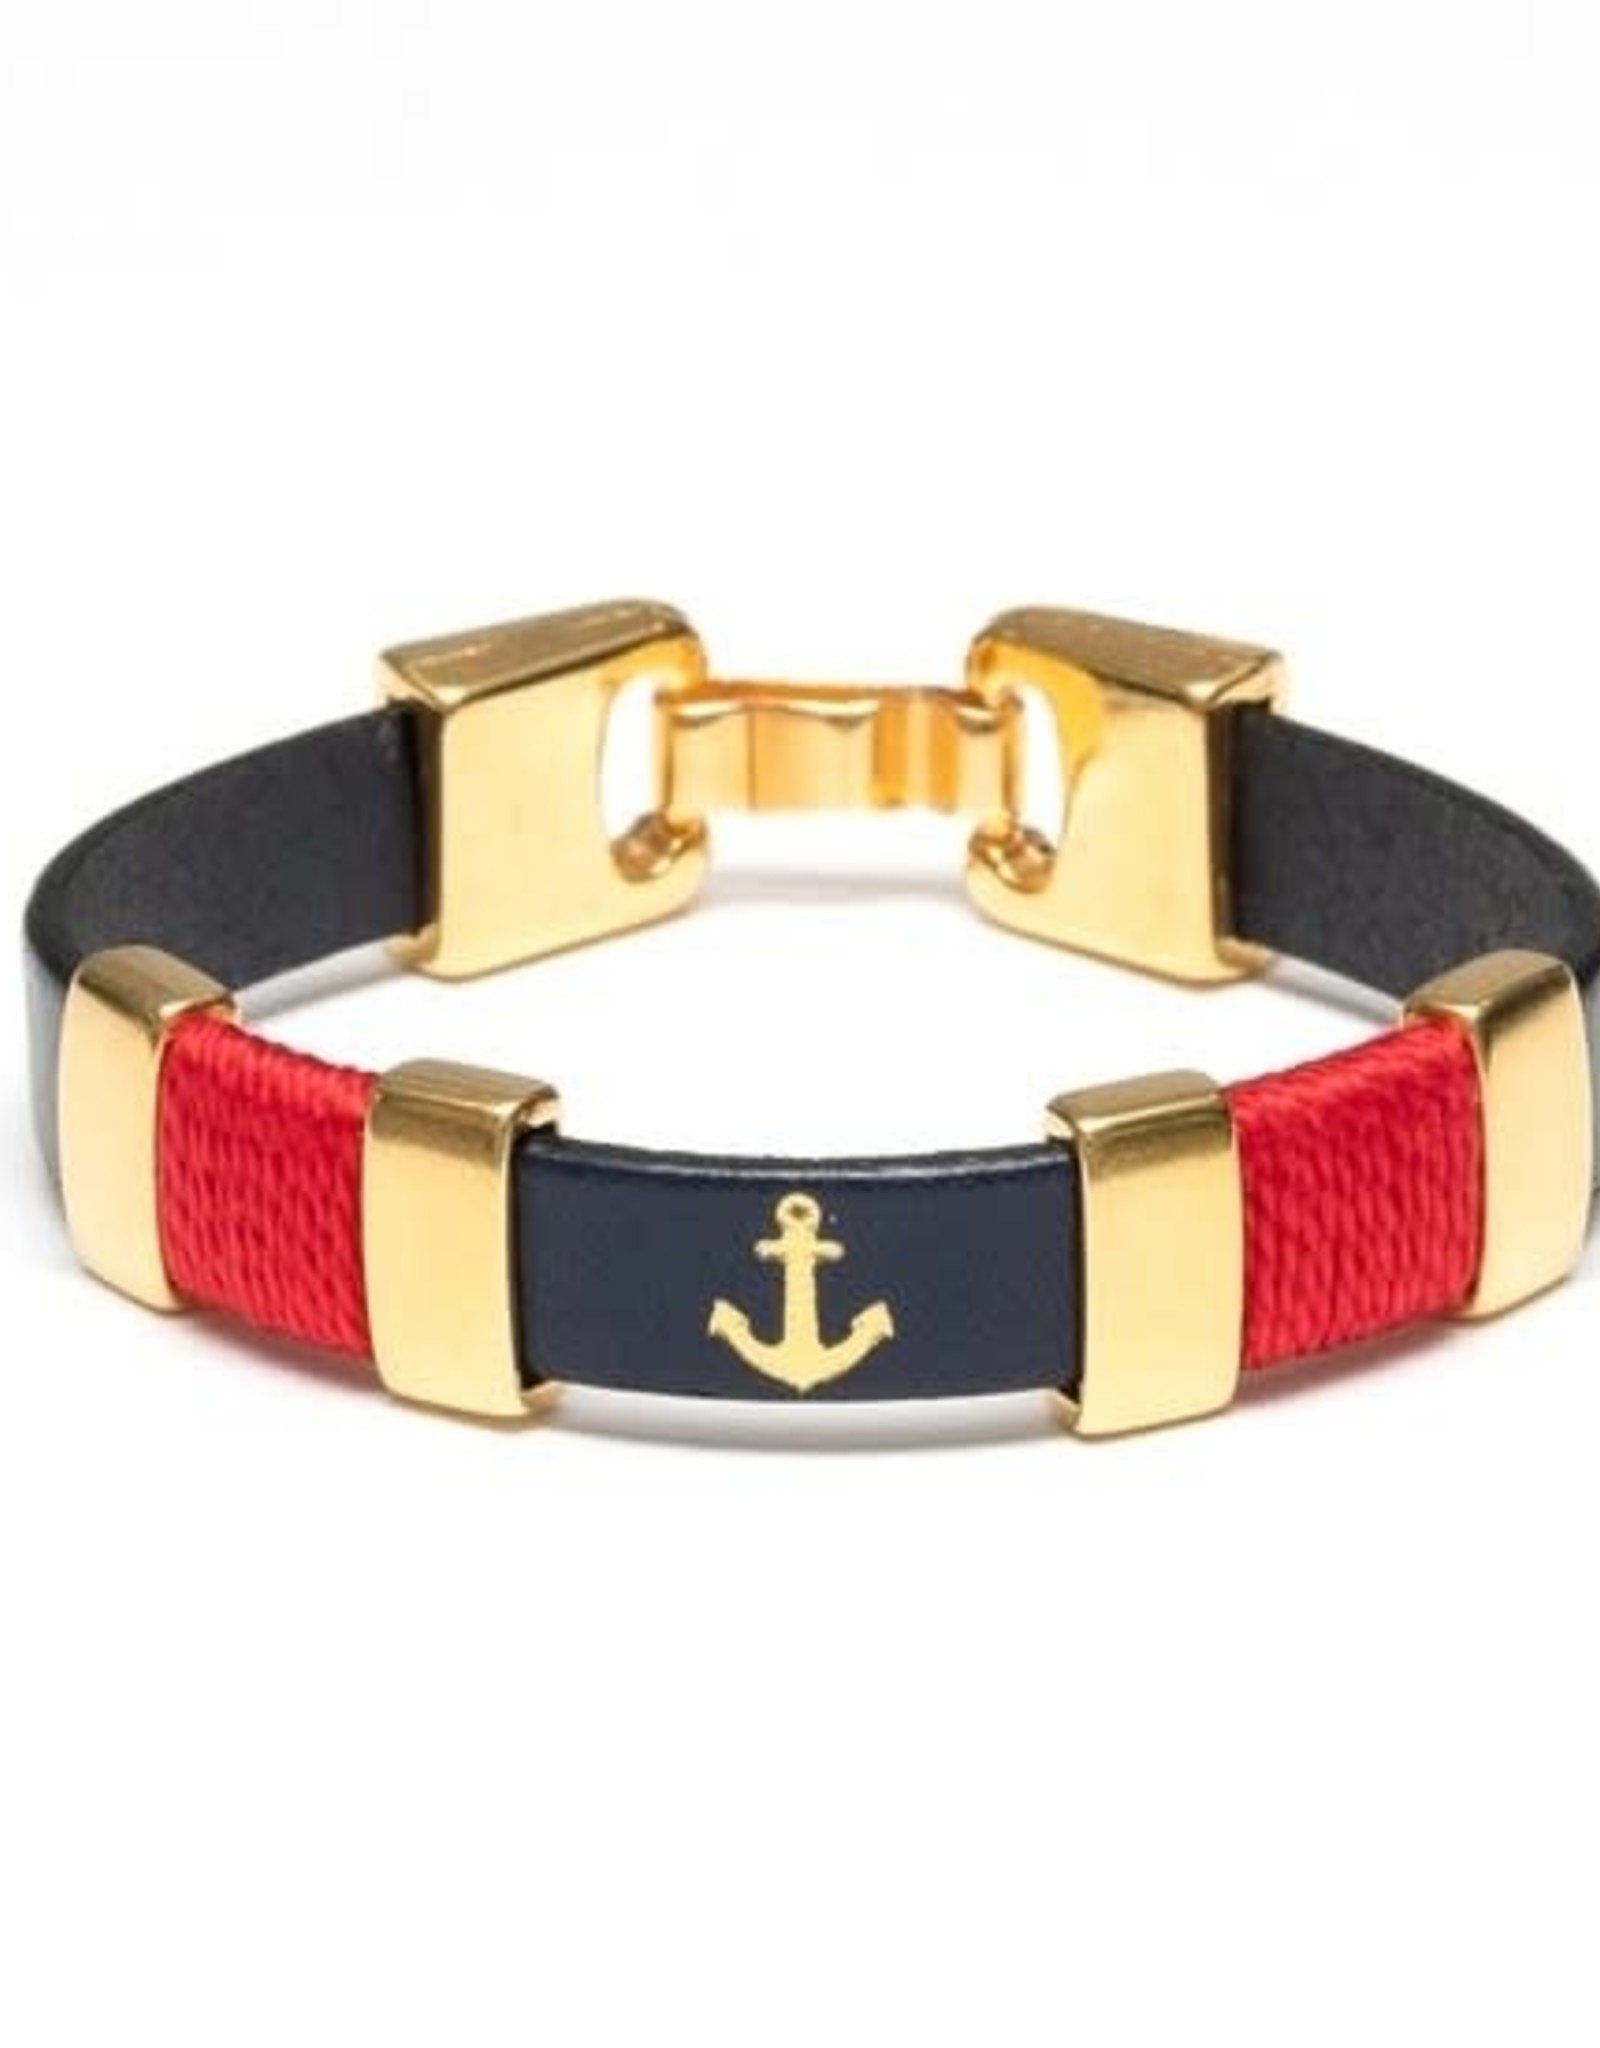 Allison Cole Jewelry Chatham Bracelet - Navy/Red/Gold S